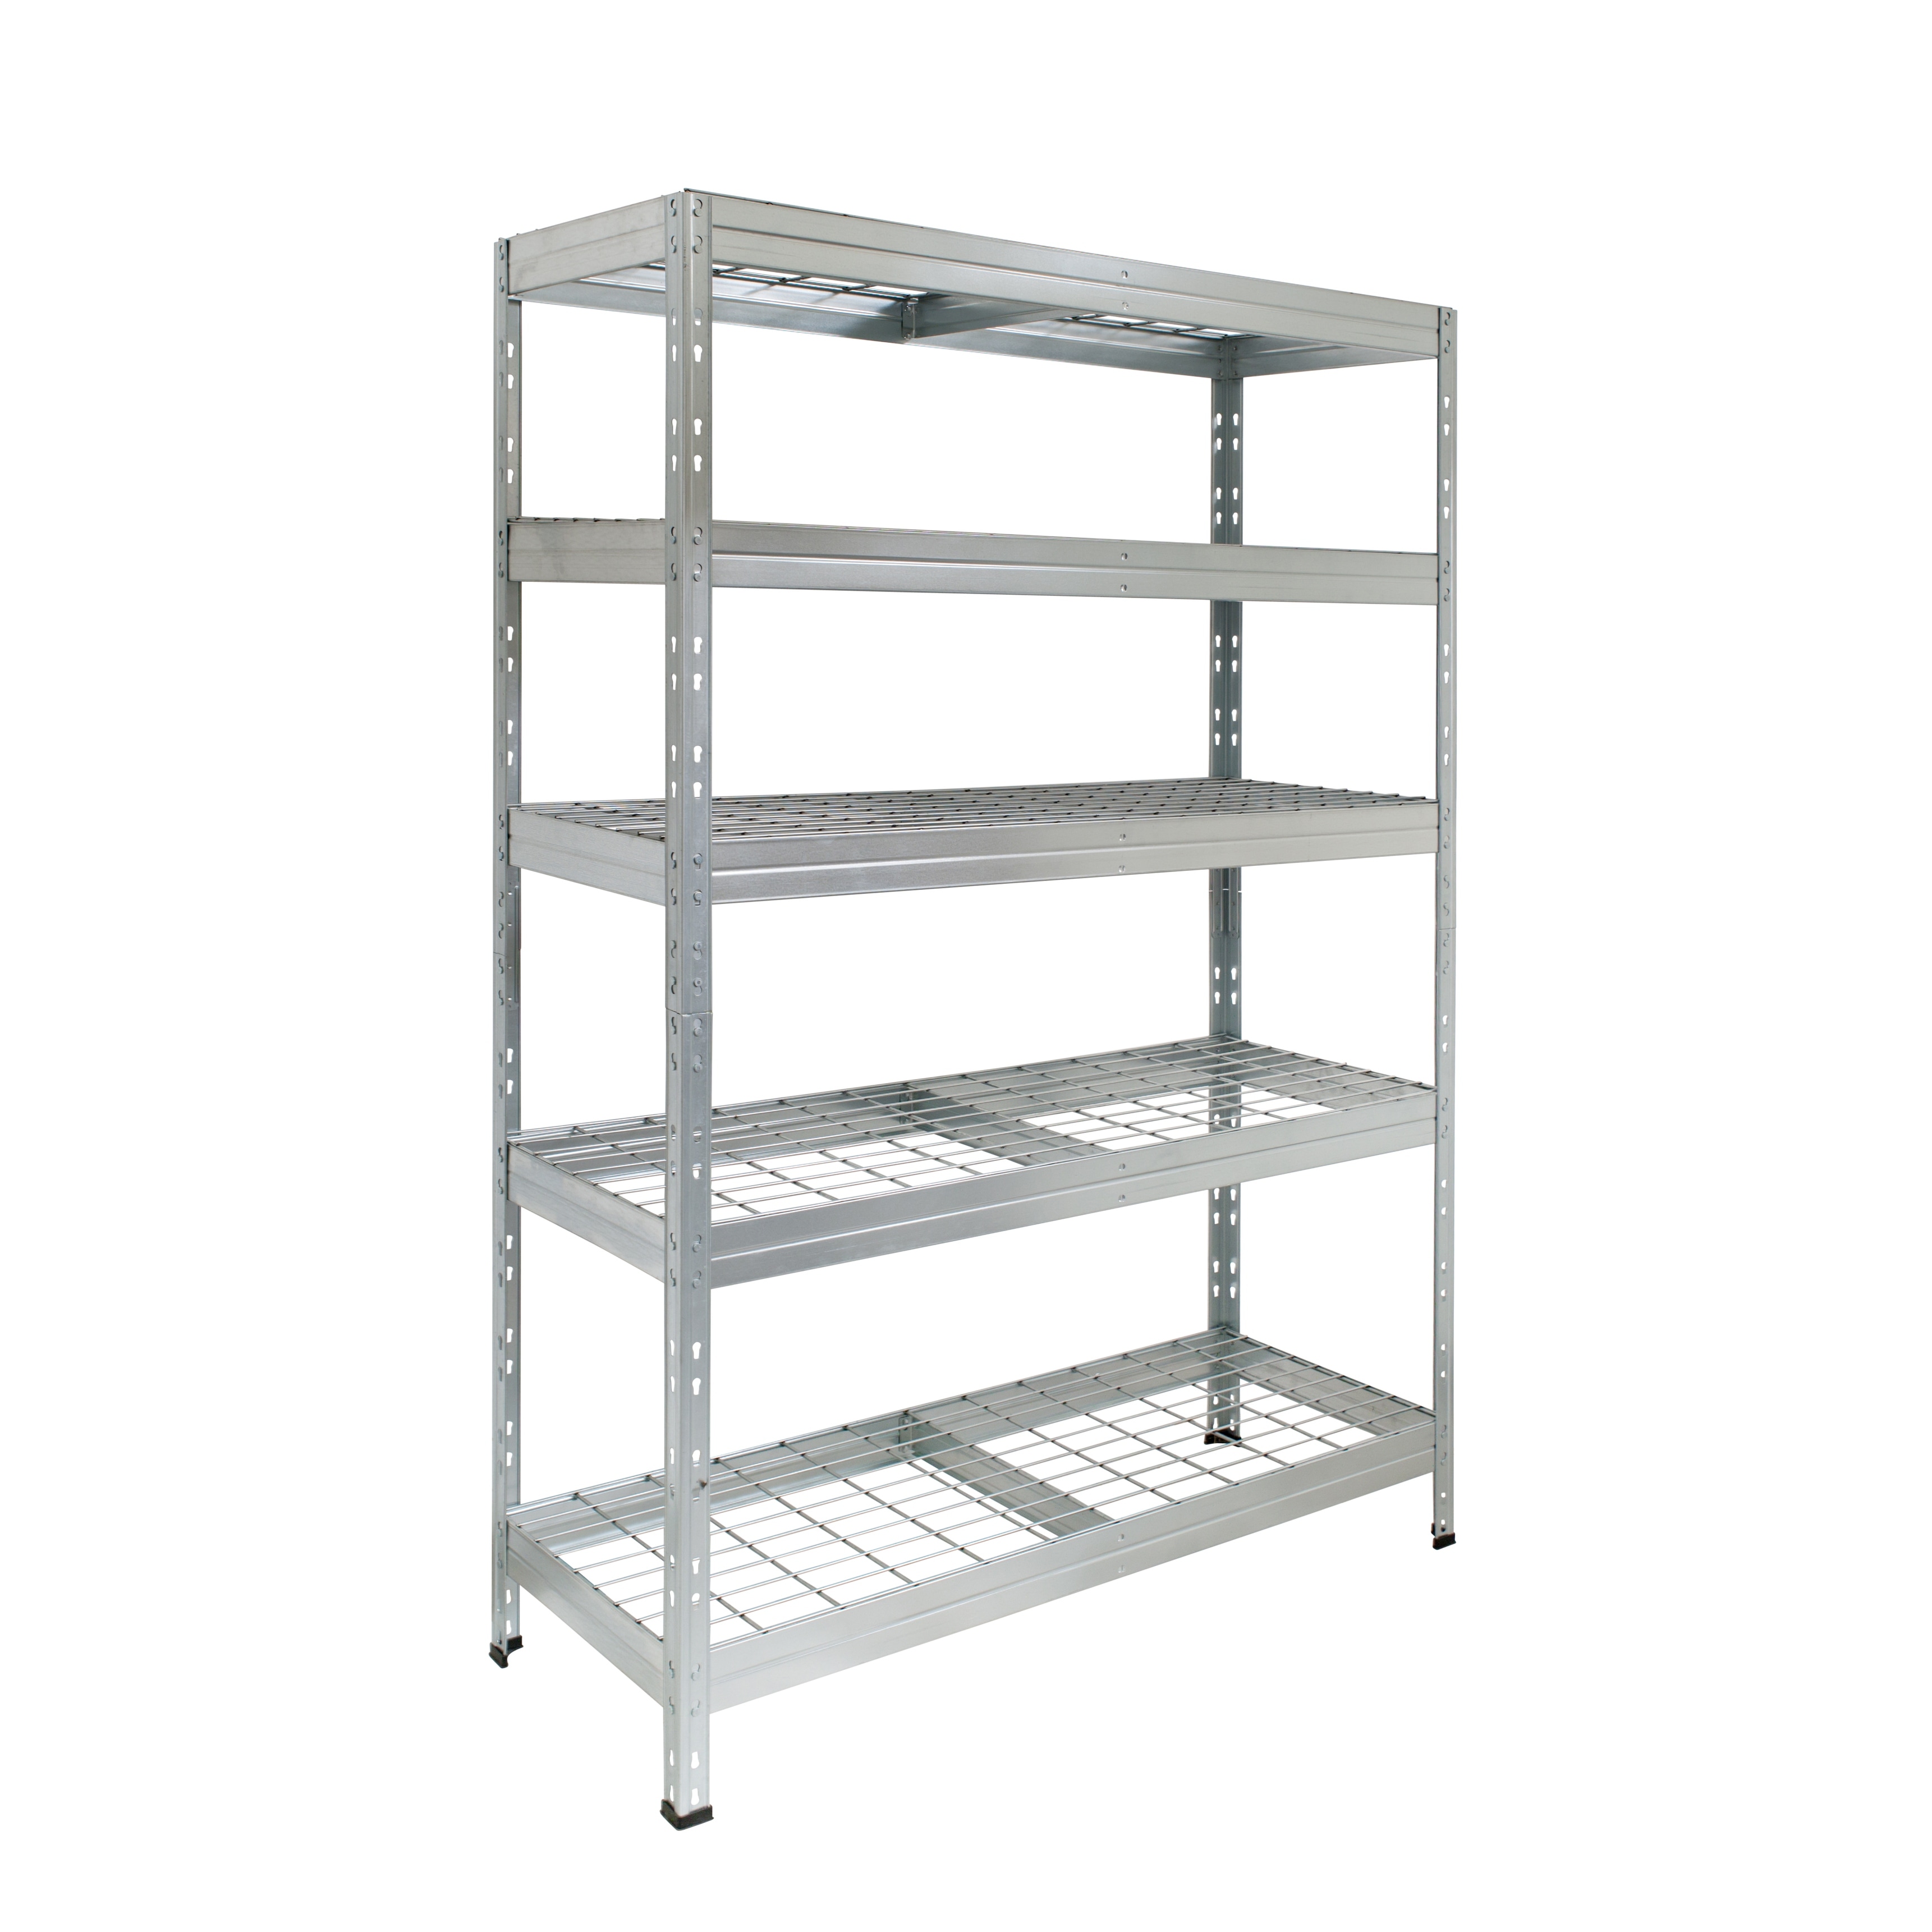 https://ak1.ostkcdn.com/images/products/is/images/direct/fa8ca2242eb51273b13642bacc684408650e635d/AR-SHELVING-Wire-rack-47-18-500-Lb.-Galvanized.jpg